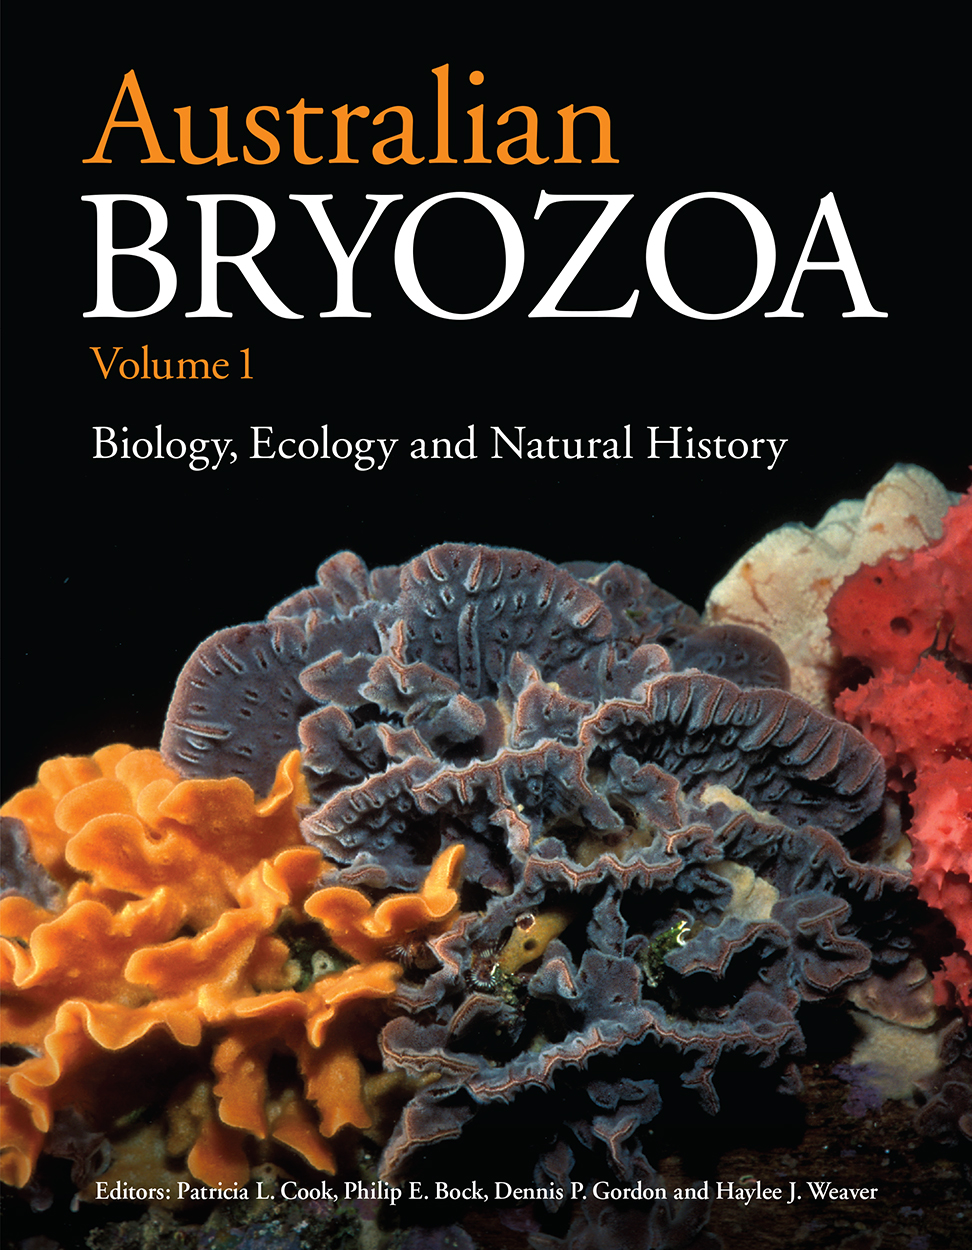 Cover featuring orange, grey and red Celleporaria colonies on a black background.